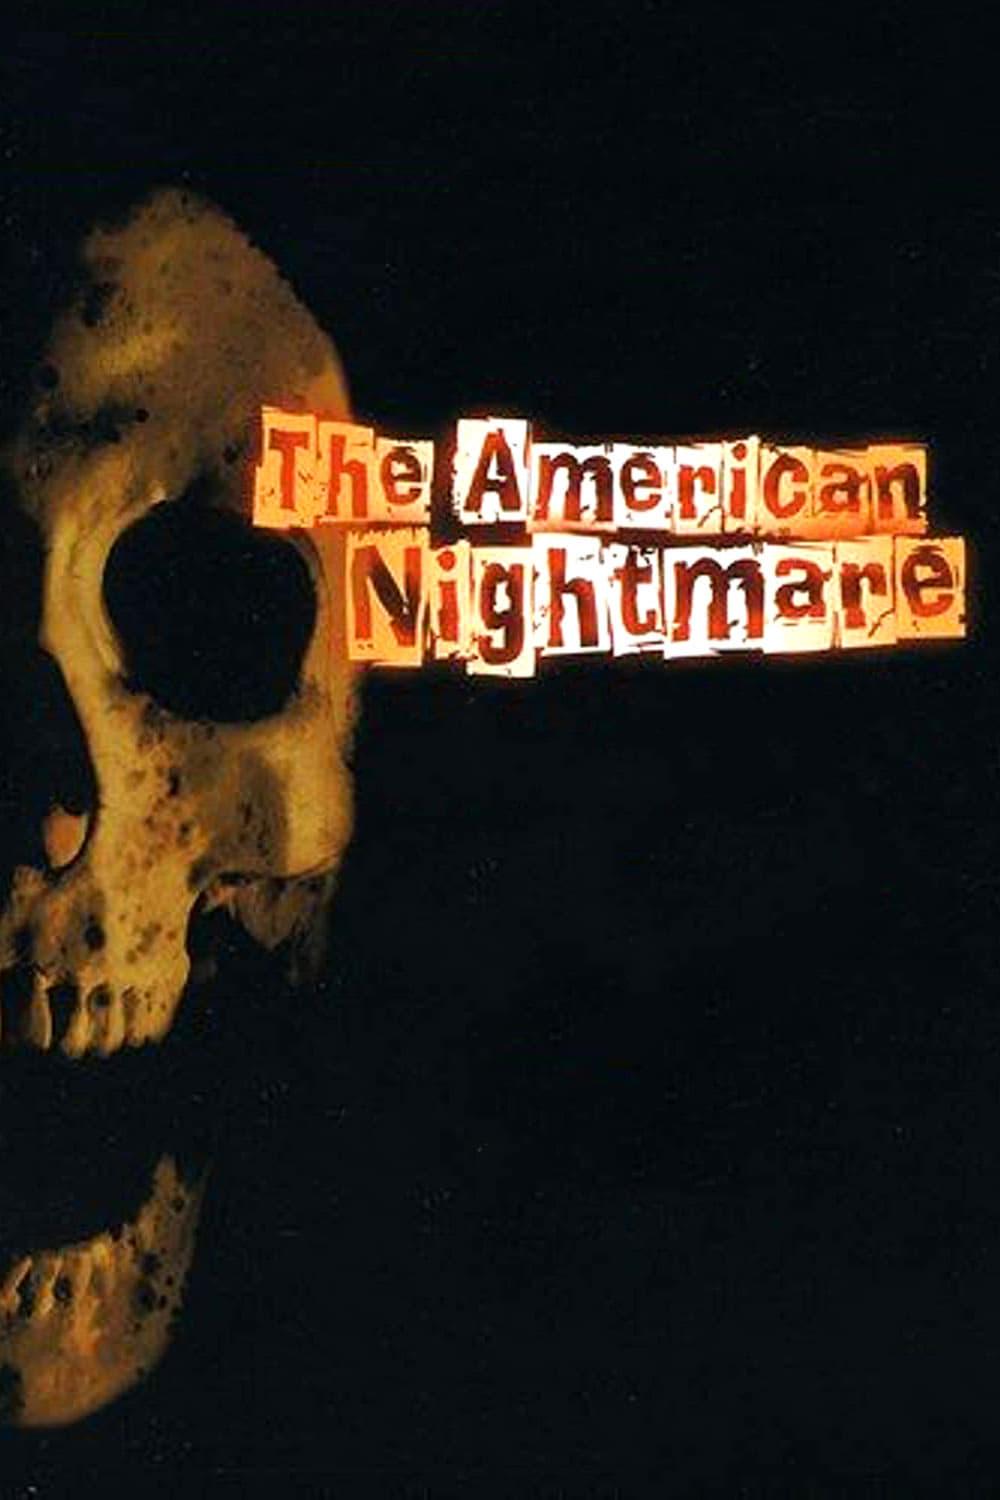 The American Nightmare poster